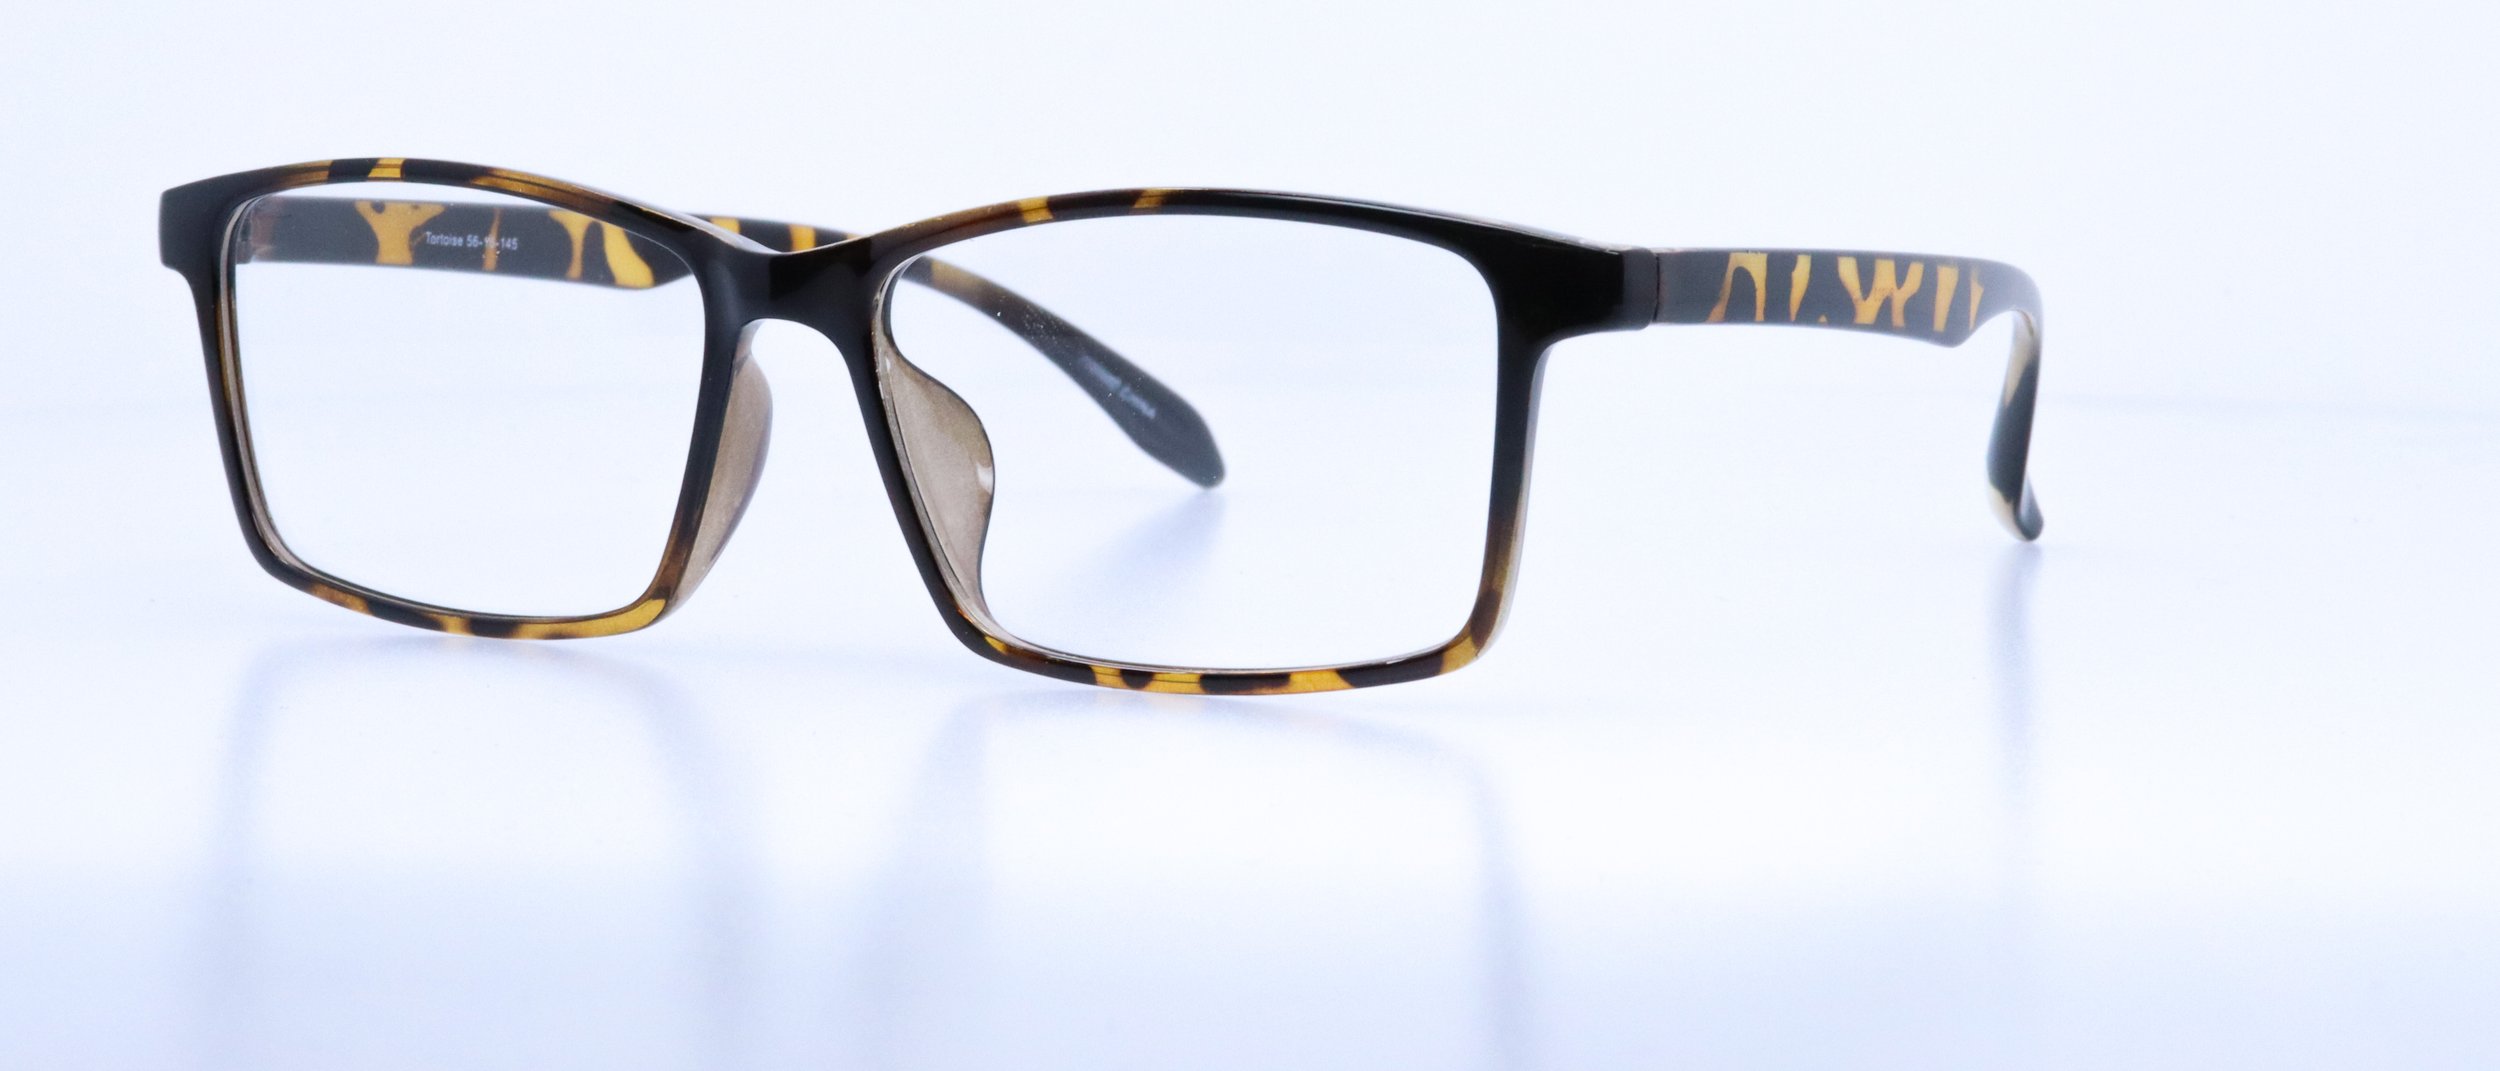  BV903: 56-16-145, Available in Black Fade or Tortoise 